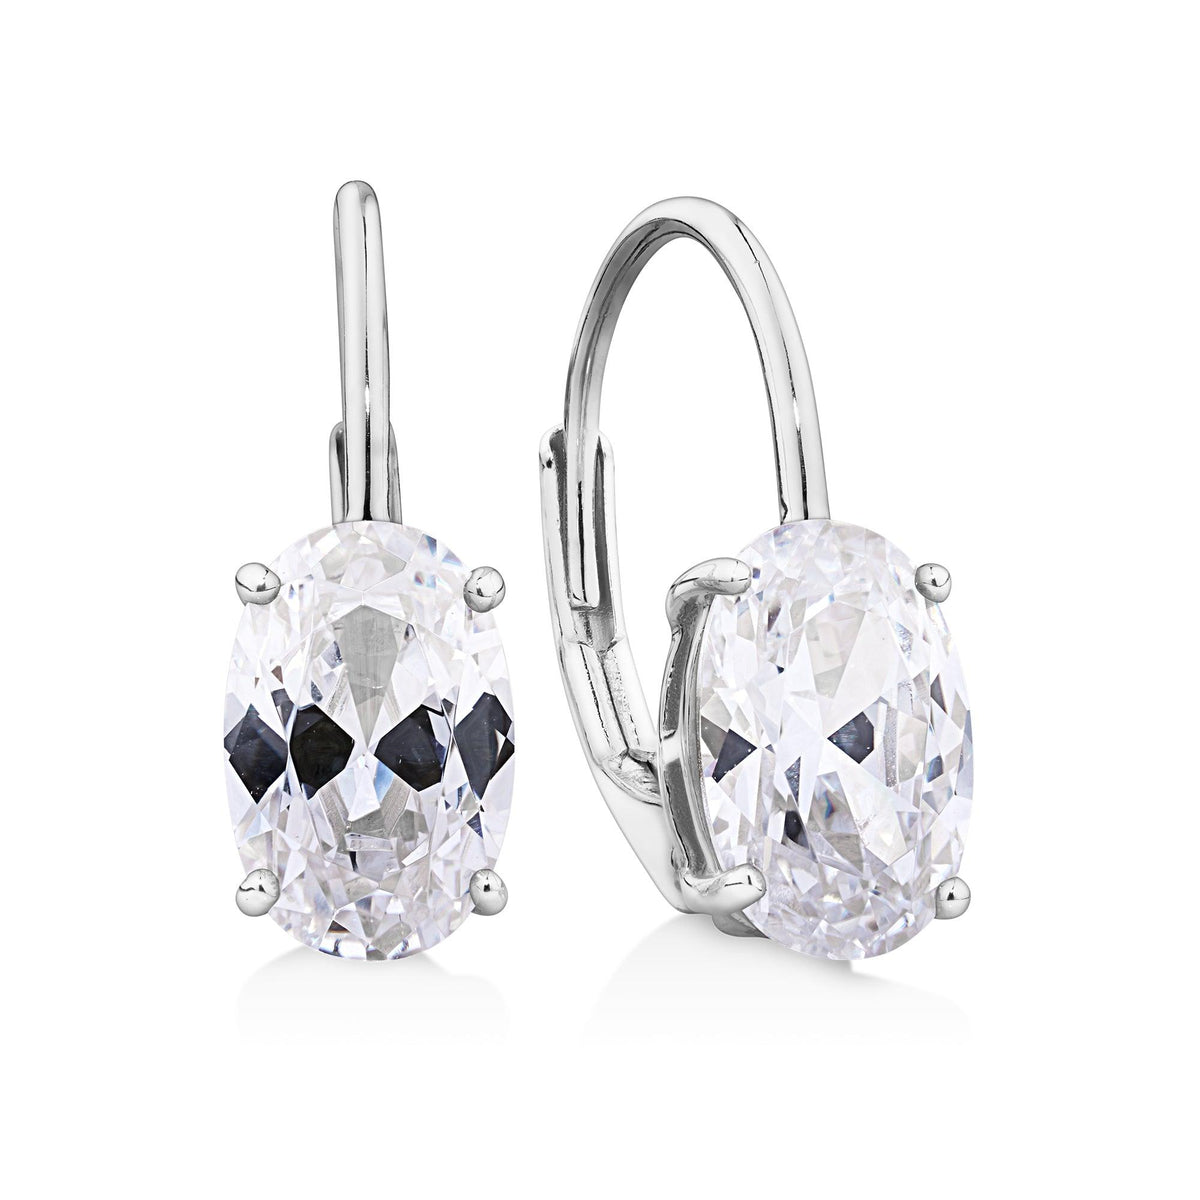 Cubic Zirconia Earrings in Sterling Silver Rhodium Plated - Wallace Bishop